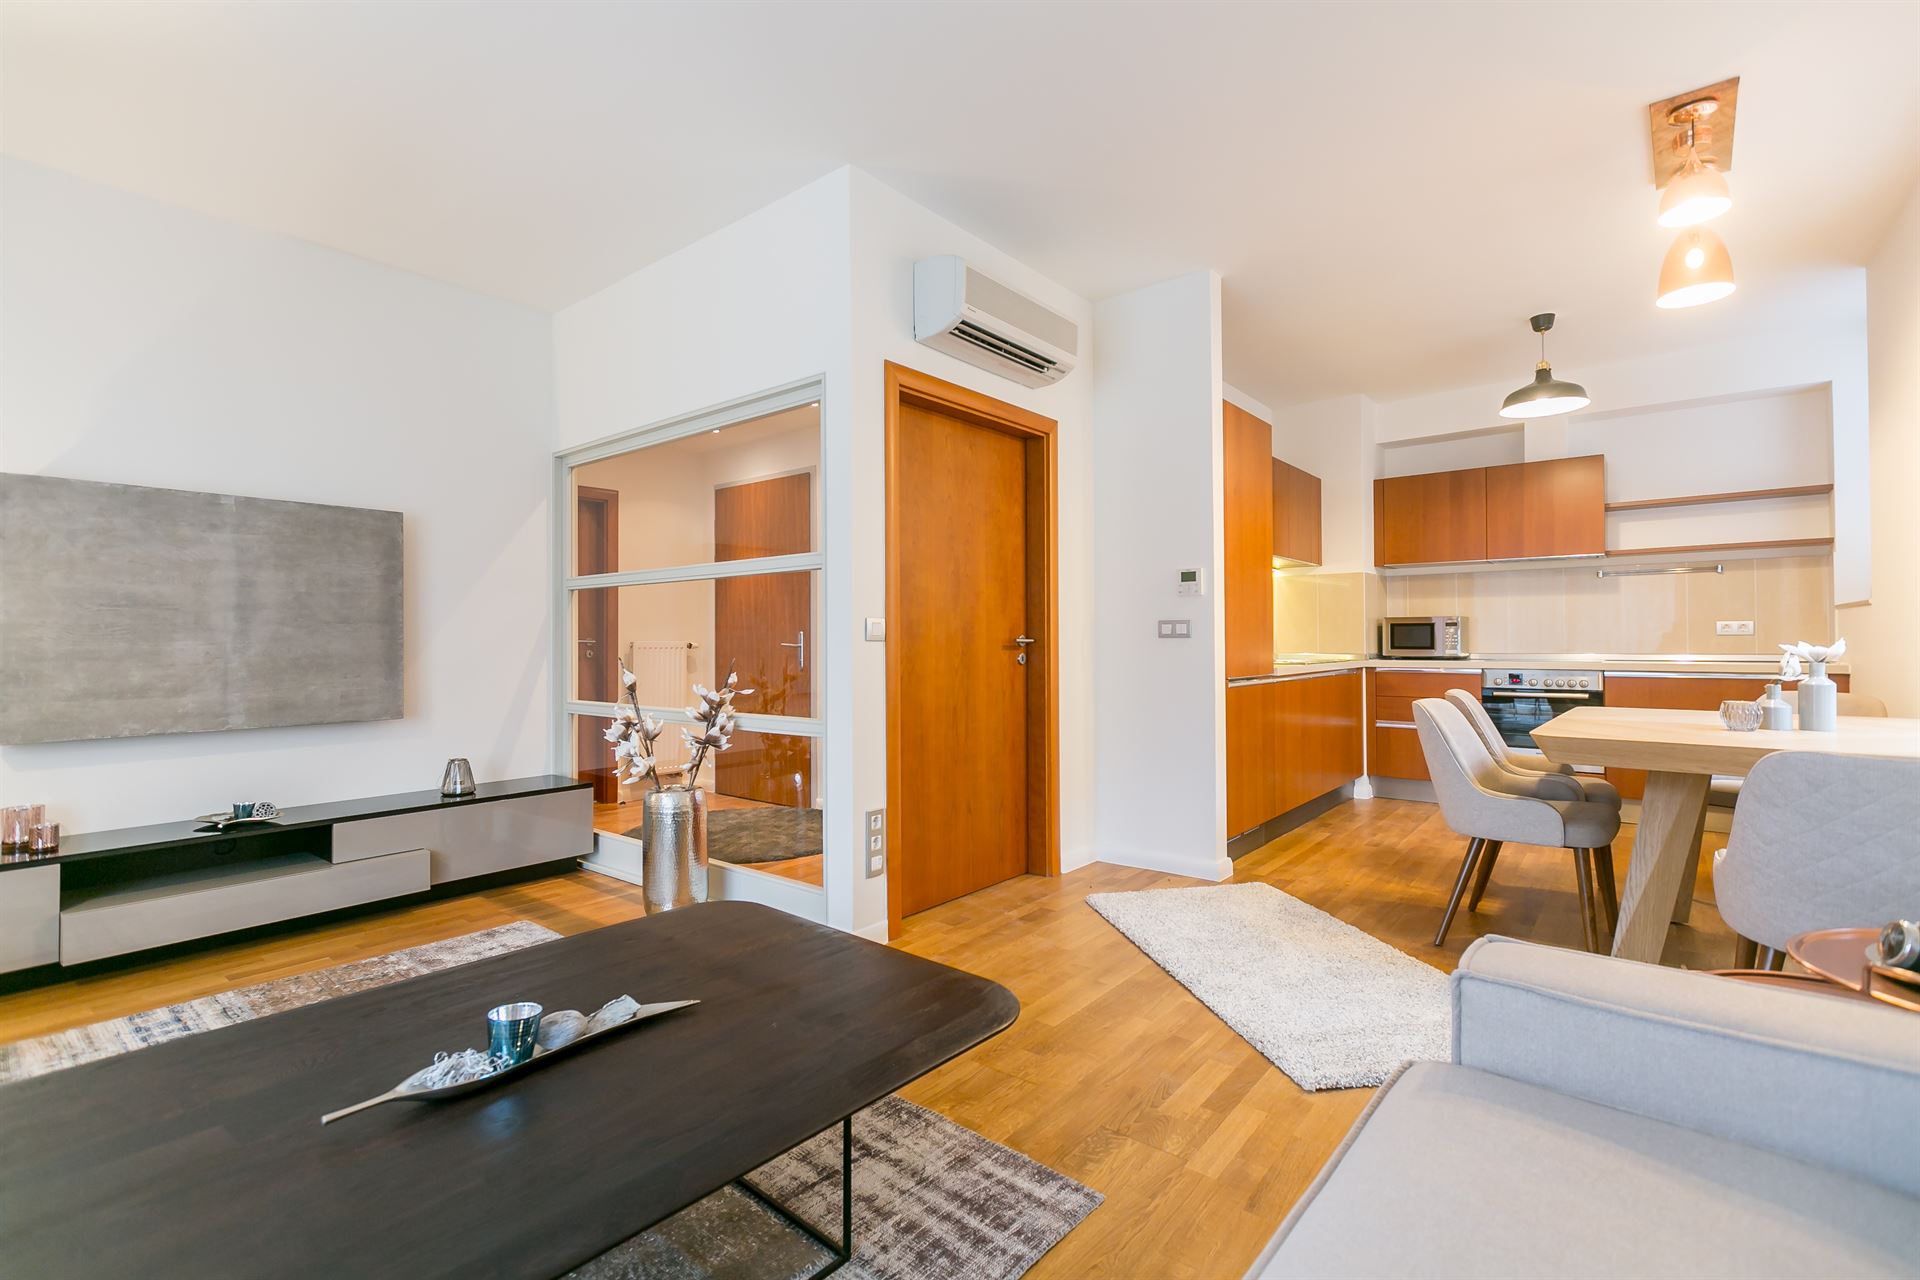 budapest-rental-long-term-lease-luxury-1-bedroom-apartment-with-view-flatrental-budapest-castle-district-113